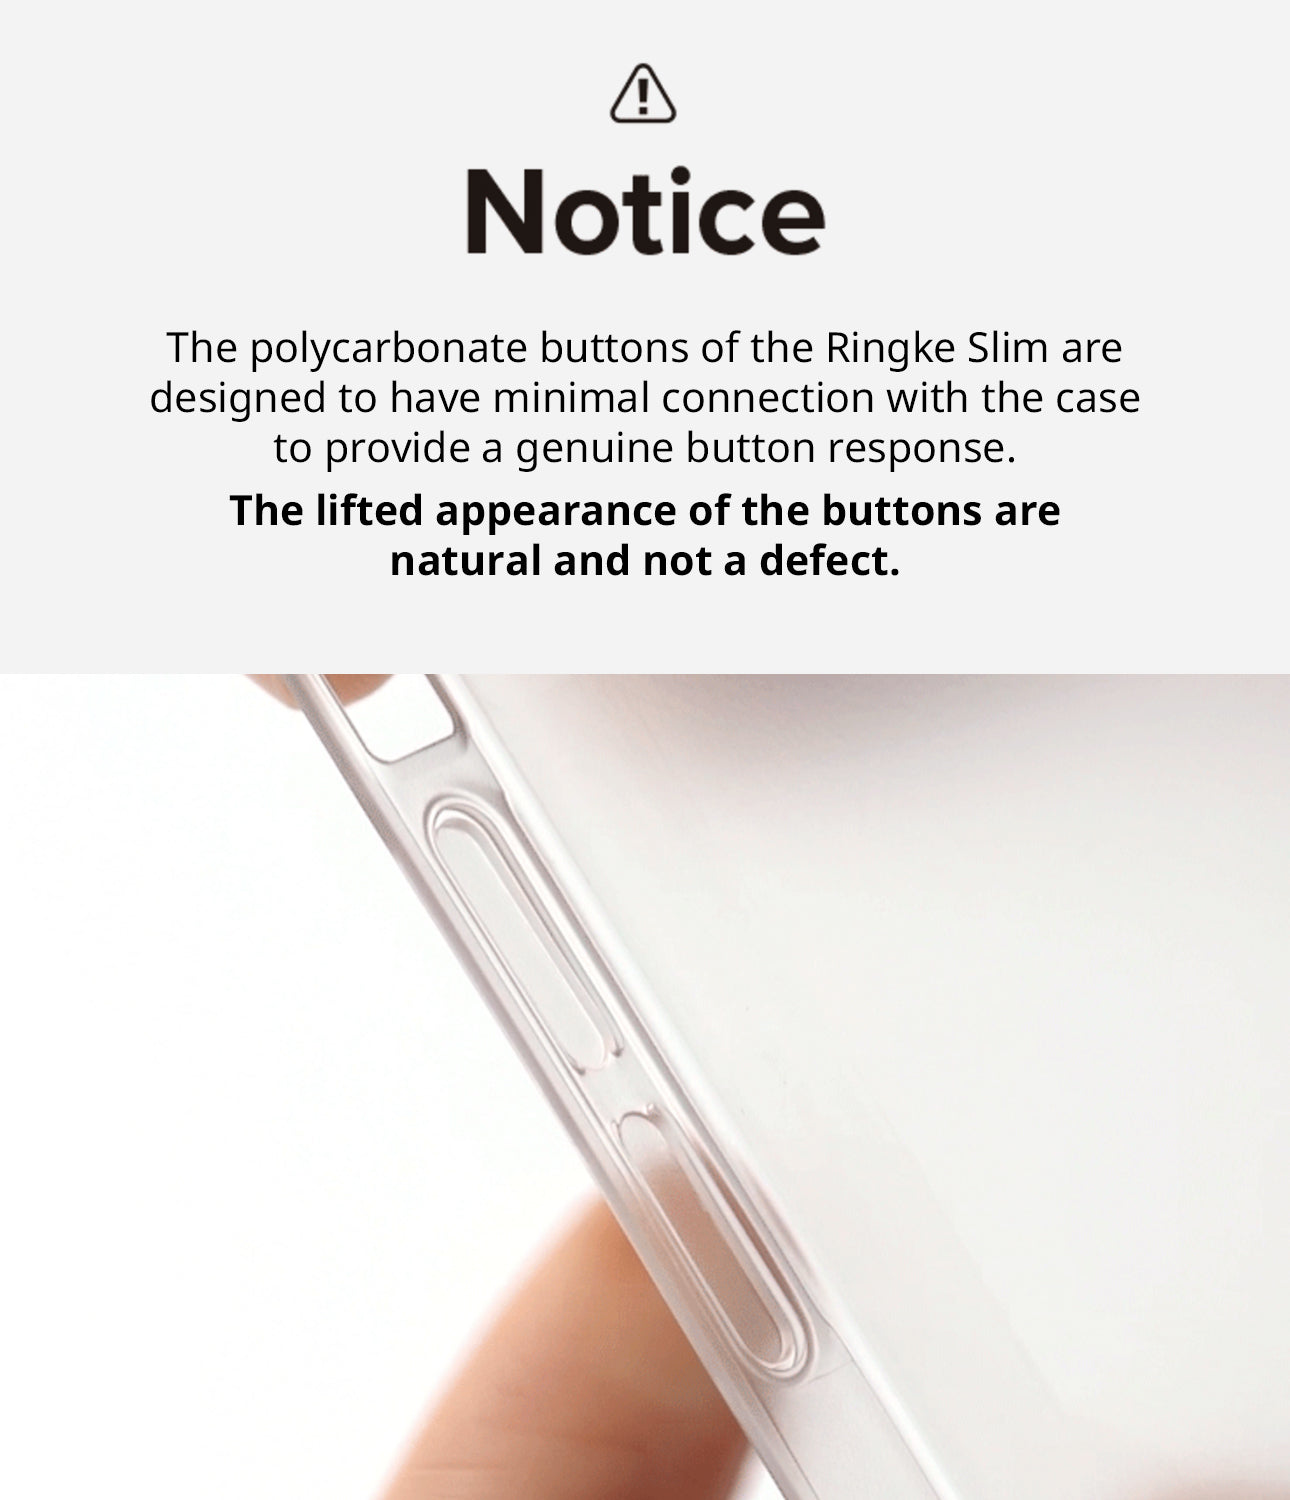 iPhone 14 Pro Max Case | Slim - Notice. The polycarbonate buttons of the Ringke Slim are designed to have minimal connection with the case to provide a genuine button response. The lifted appearance of the buttons are natural and not a defect.